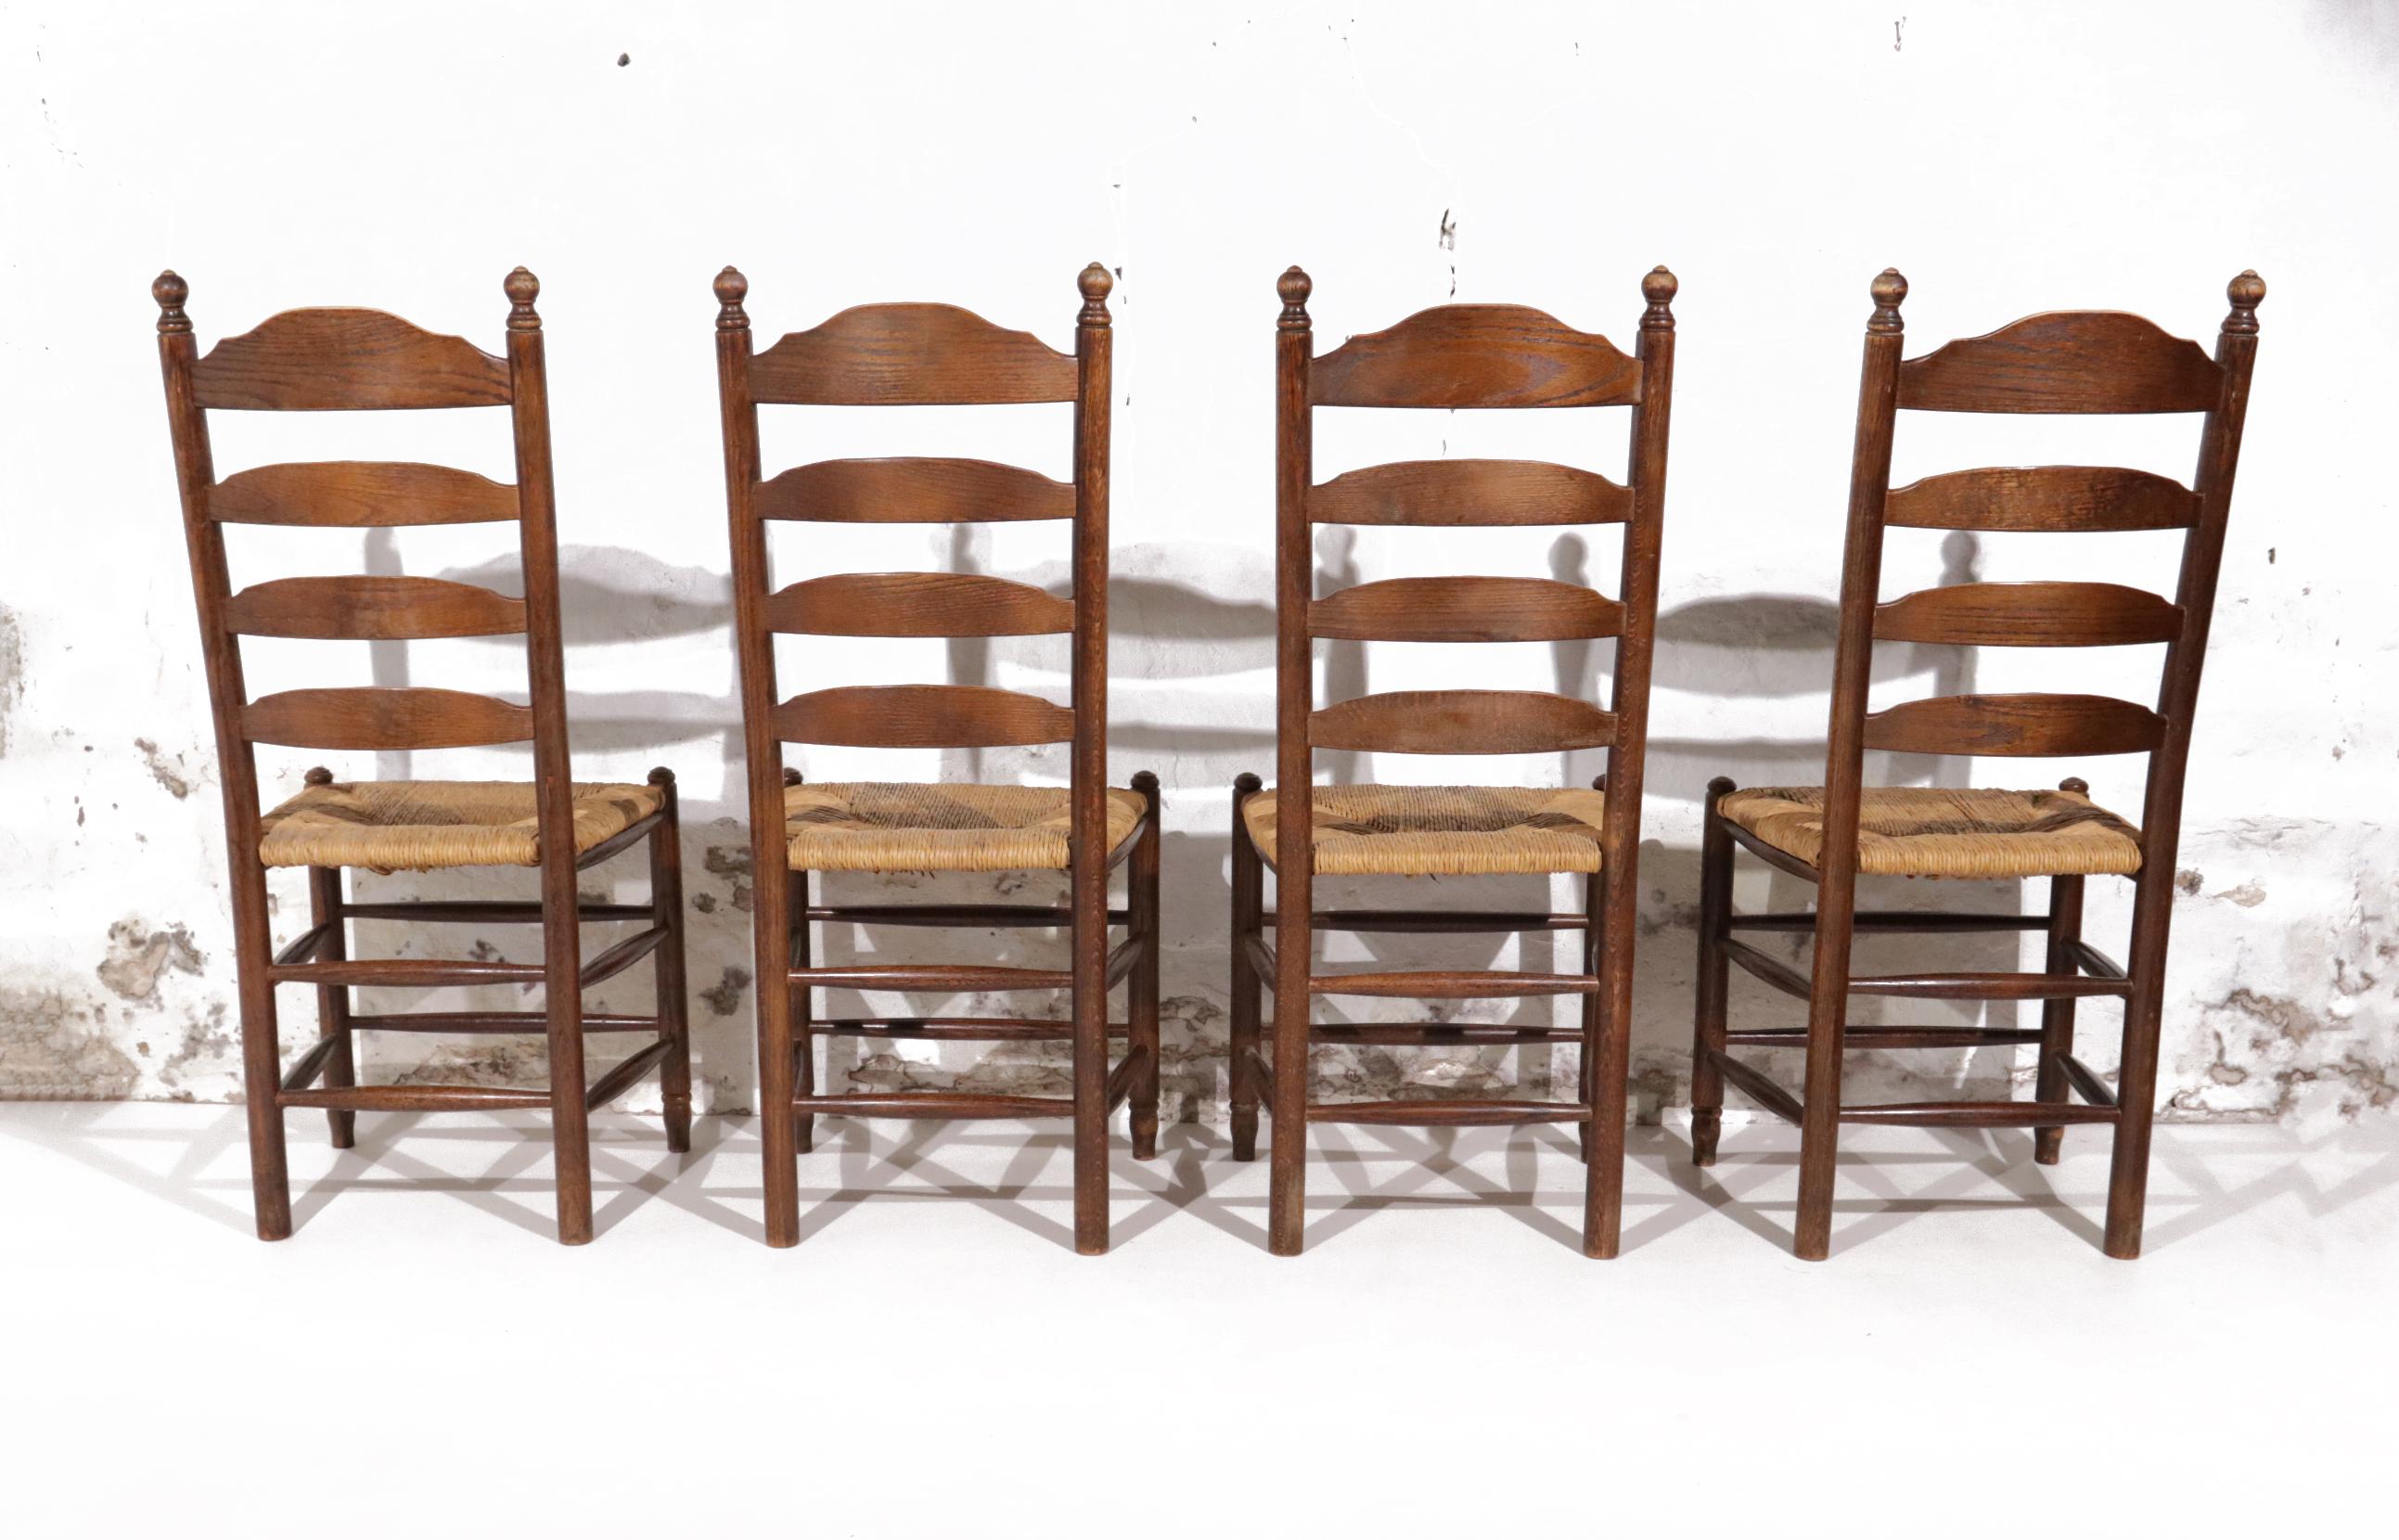 Beautiful chairs from the 60s made of solid oak with a wicker woven seat.
Fit perfectly with the style of designers such as Charlotte Perriand and Charles Dudouyt.
They are comfortable and have a very nice warm appearance due to the use of only